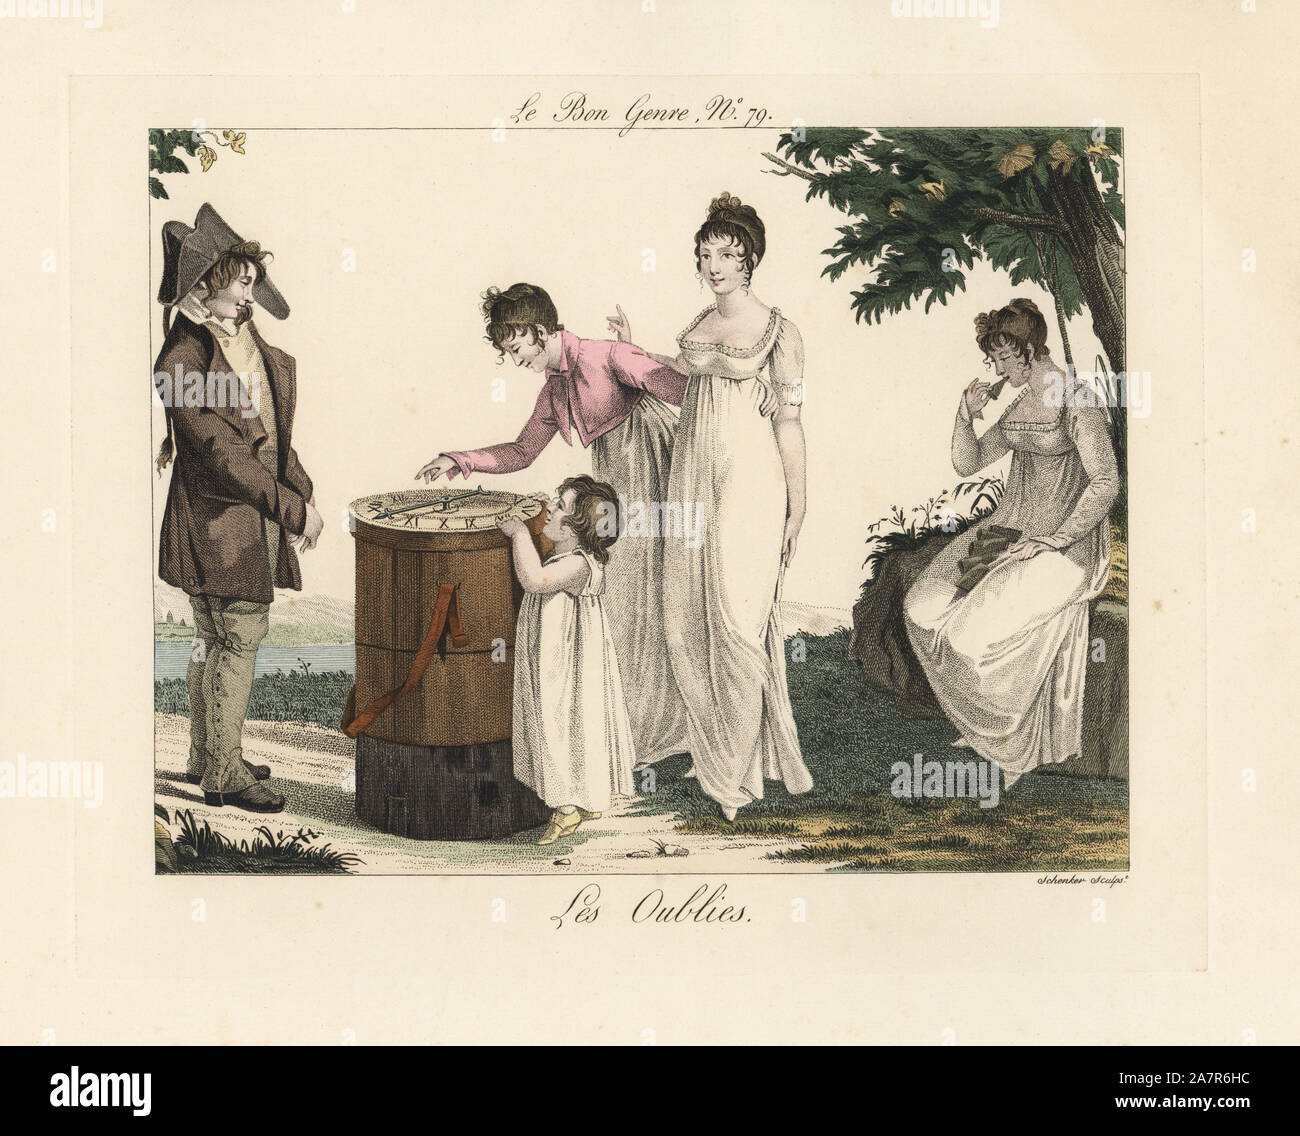 Les Oublies. A woman in the shade of a tree eats oublies (pastries, also known as plaisirs), while two women and a girl spin an arrow on a portable barrel as a man in gaiters looks on. Handcoloured engraving by Schenker from Pierre de la Mesangere's Le Bon Genre, Paris, 1817. Stock Photo